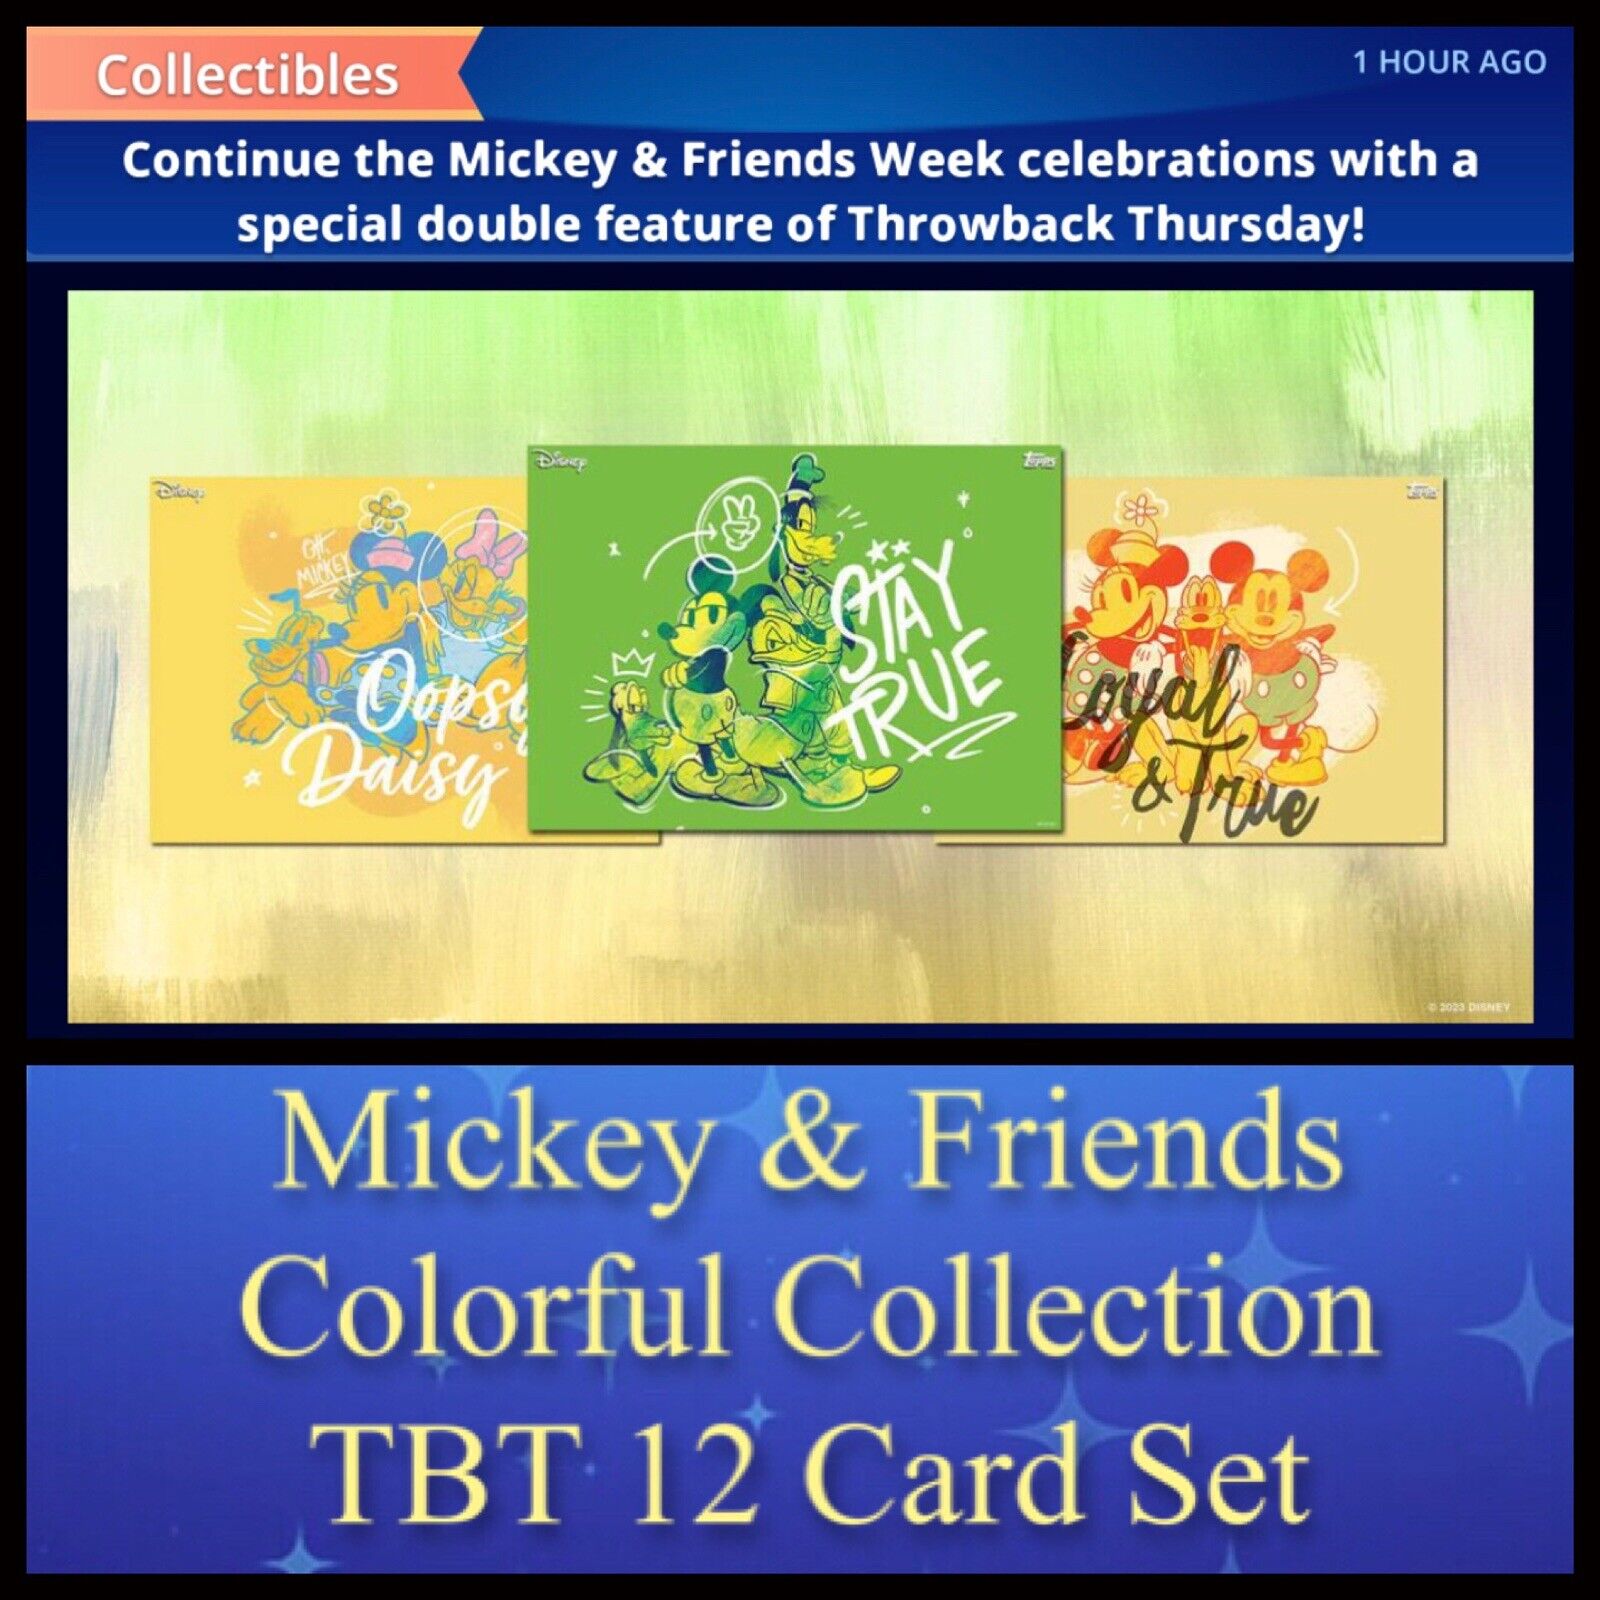 TBT MICKEY & FRIENDS COLORFUL COLLECTION+COMMON 12 CARD SET-TOPPS DISNEY COLLECT